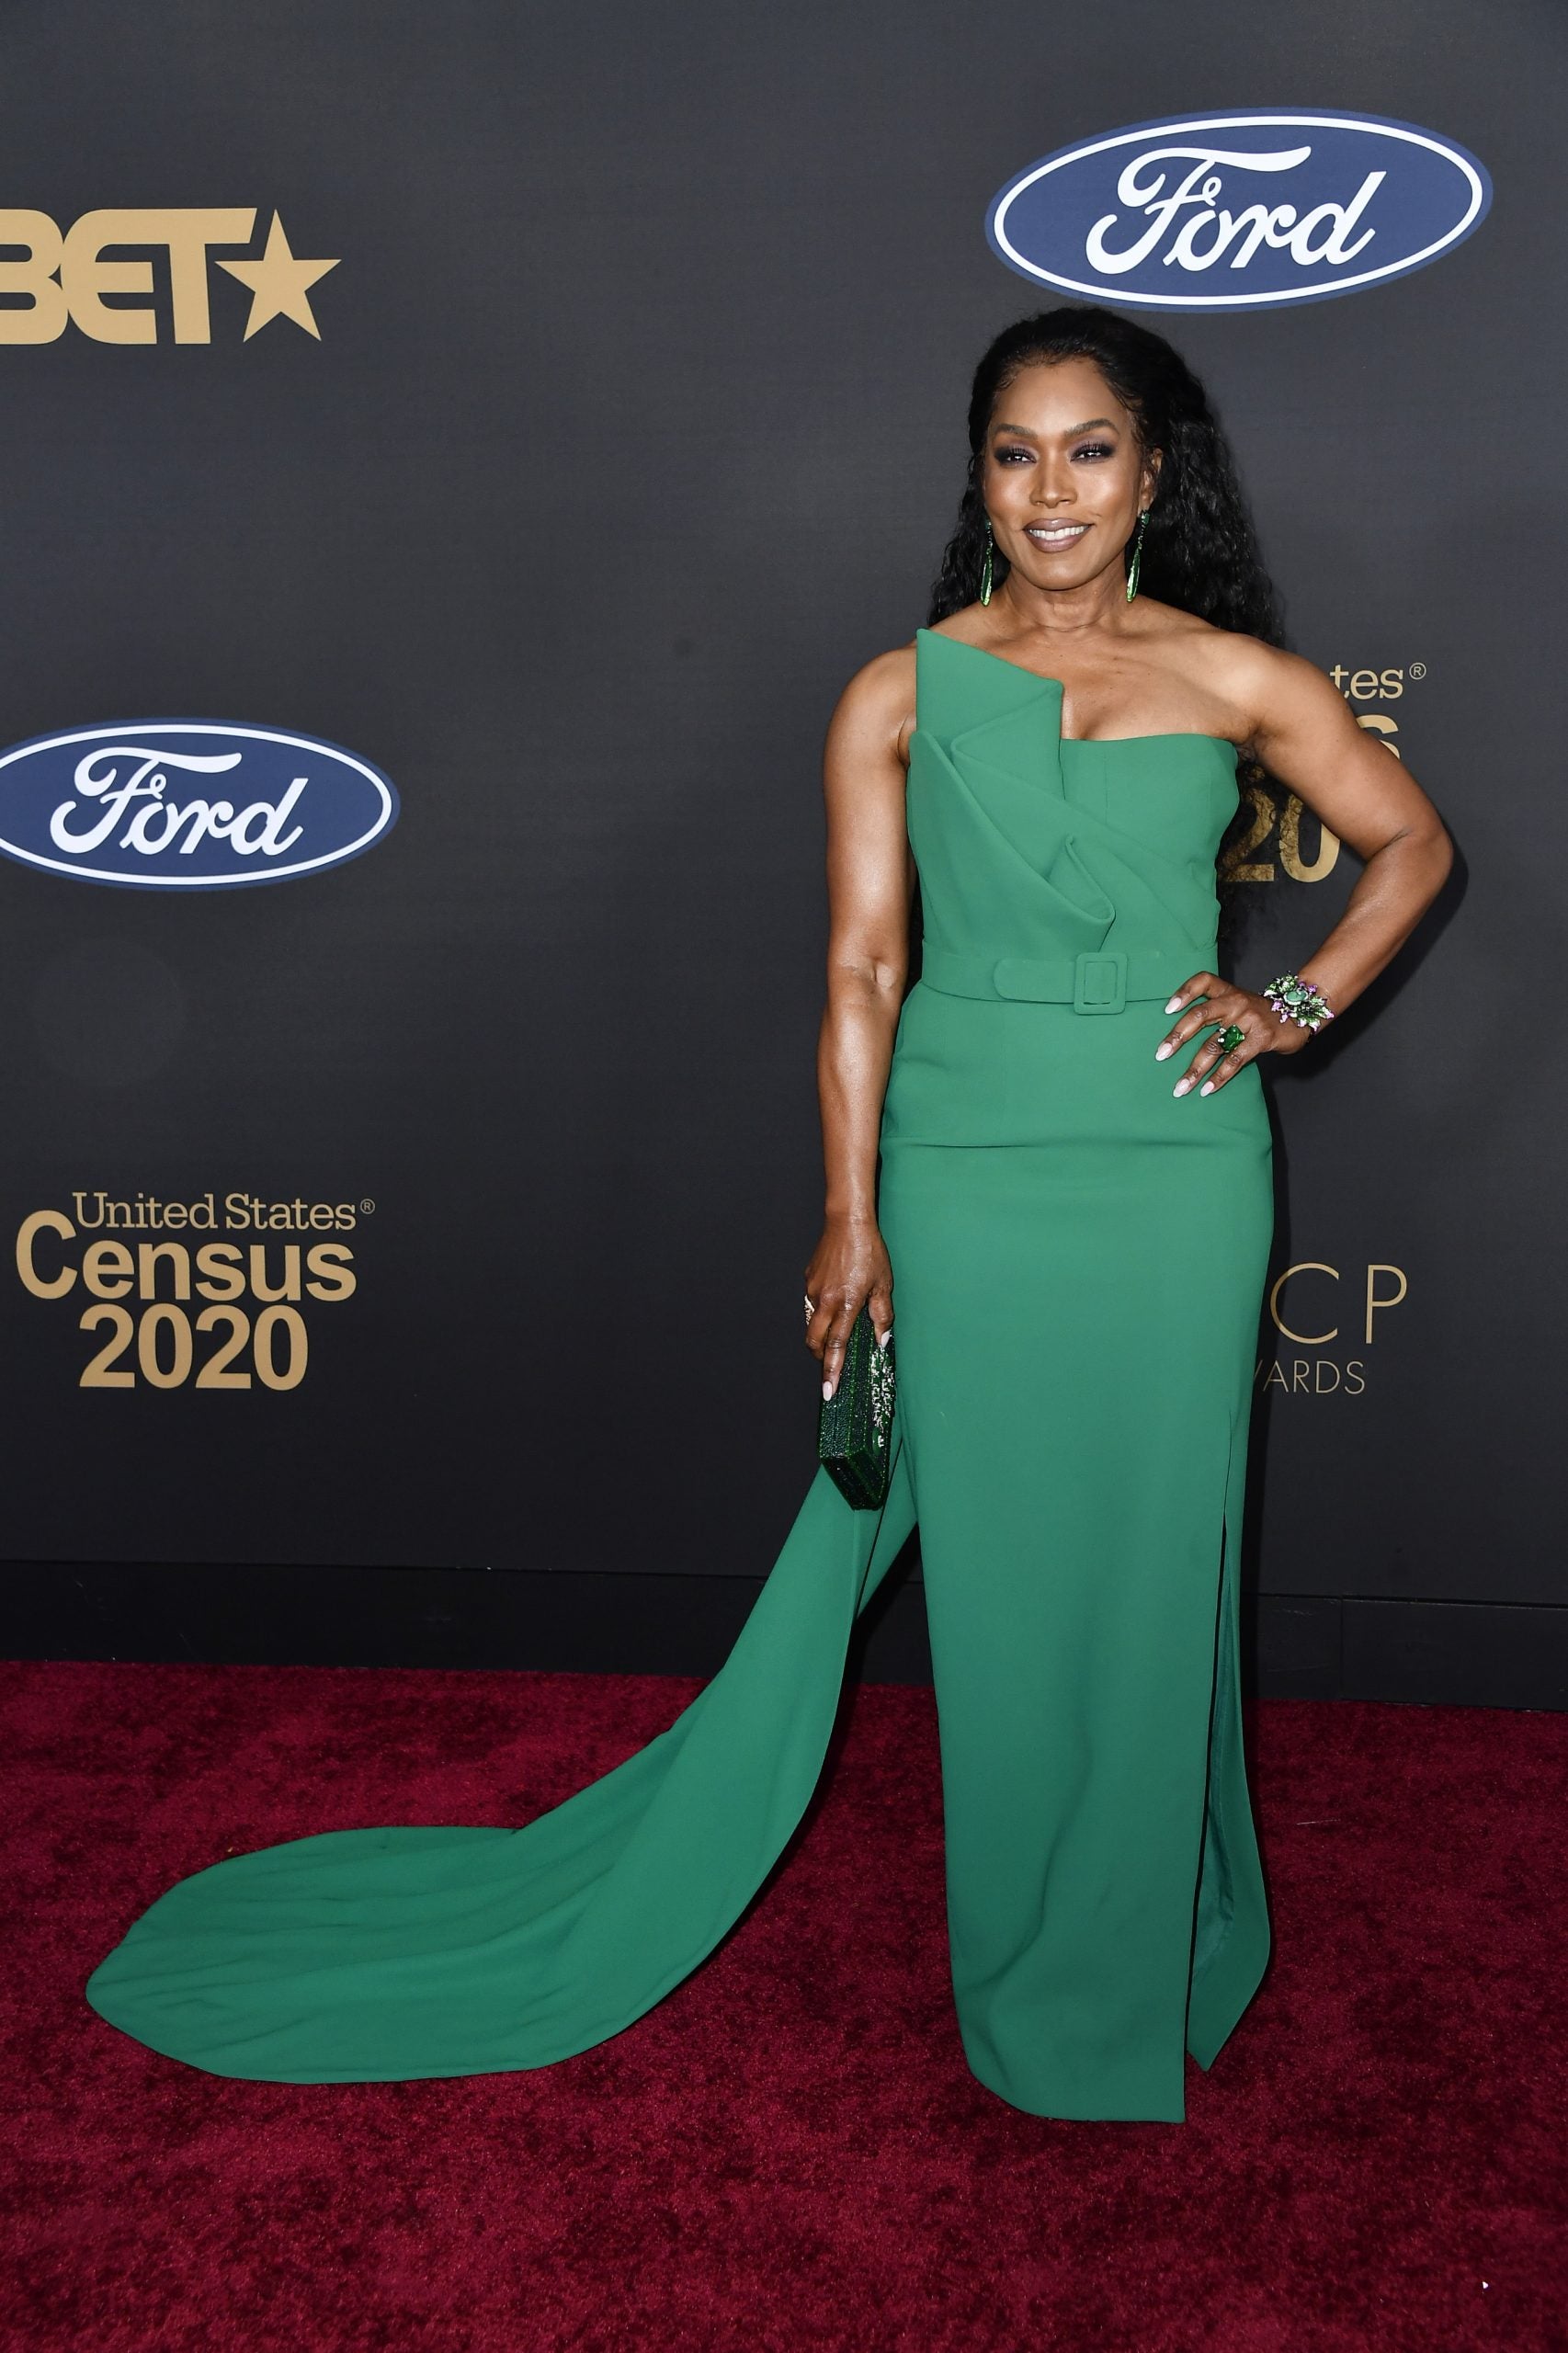 The Best Looks From The 51st NAACP Image Awards Red Carpet